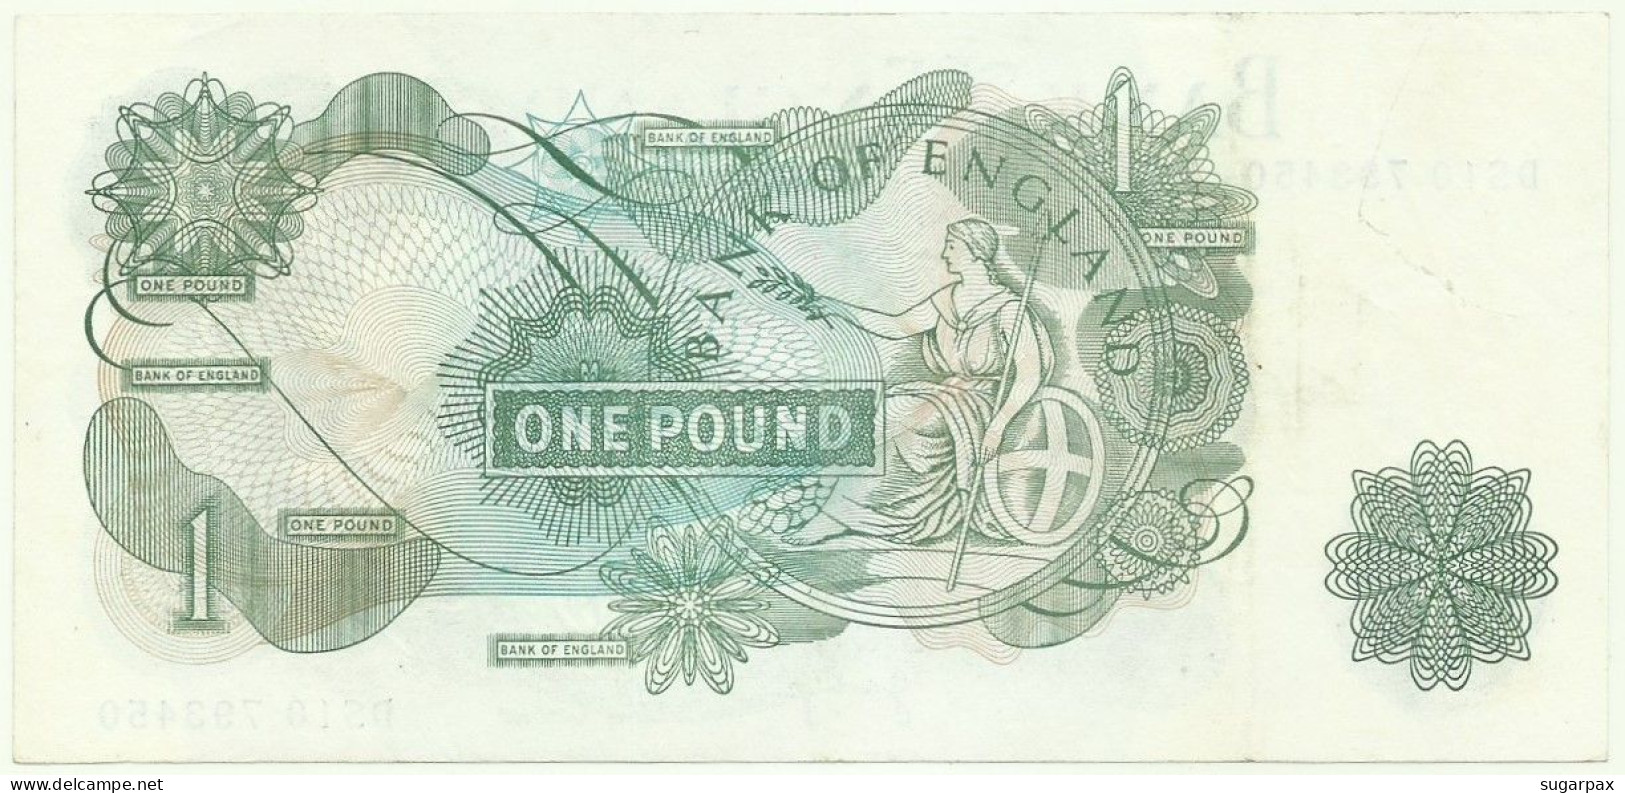 GREAT BRITAIN - 1 POUND - ND ( 1970-77 ) - P 374 G - Serie DS10 - BANK OF ENGLAND - United Kingdom - 1 Pond